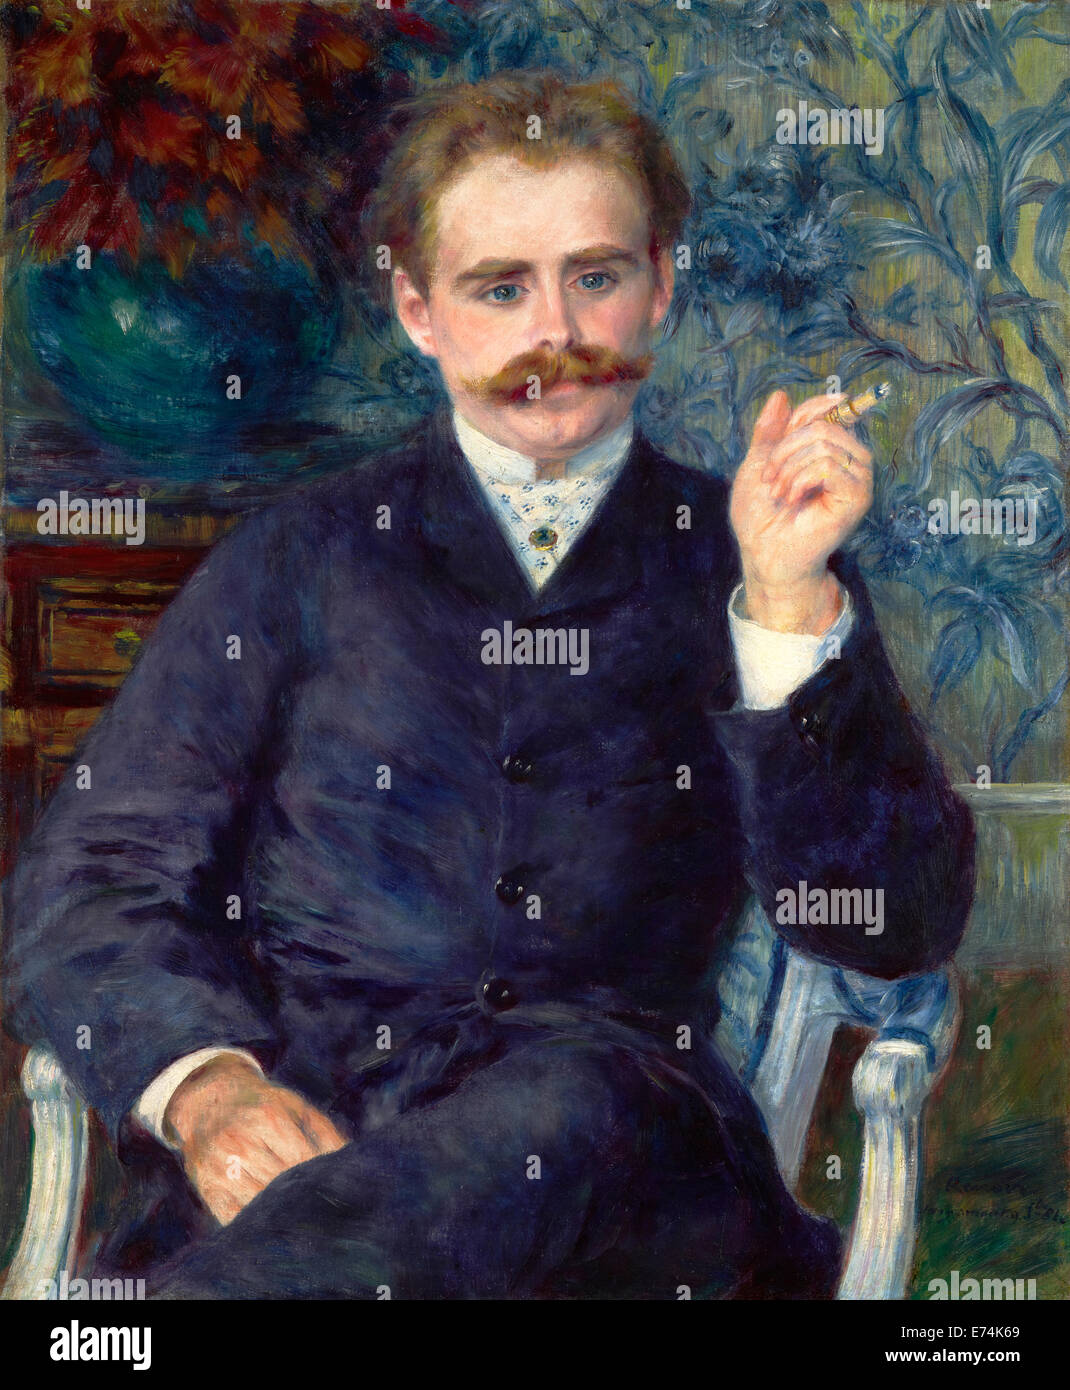 Albert Cahen d'Anvers by Pierre-Auguste Renoir, French, 1841 - 1919; France, Europe; 1881; Oil on canvas Stock Photo